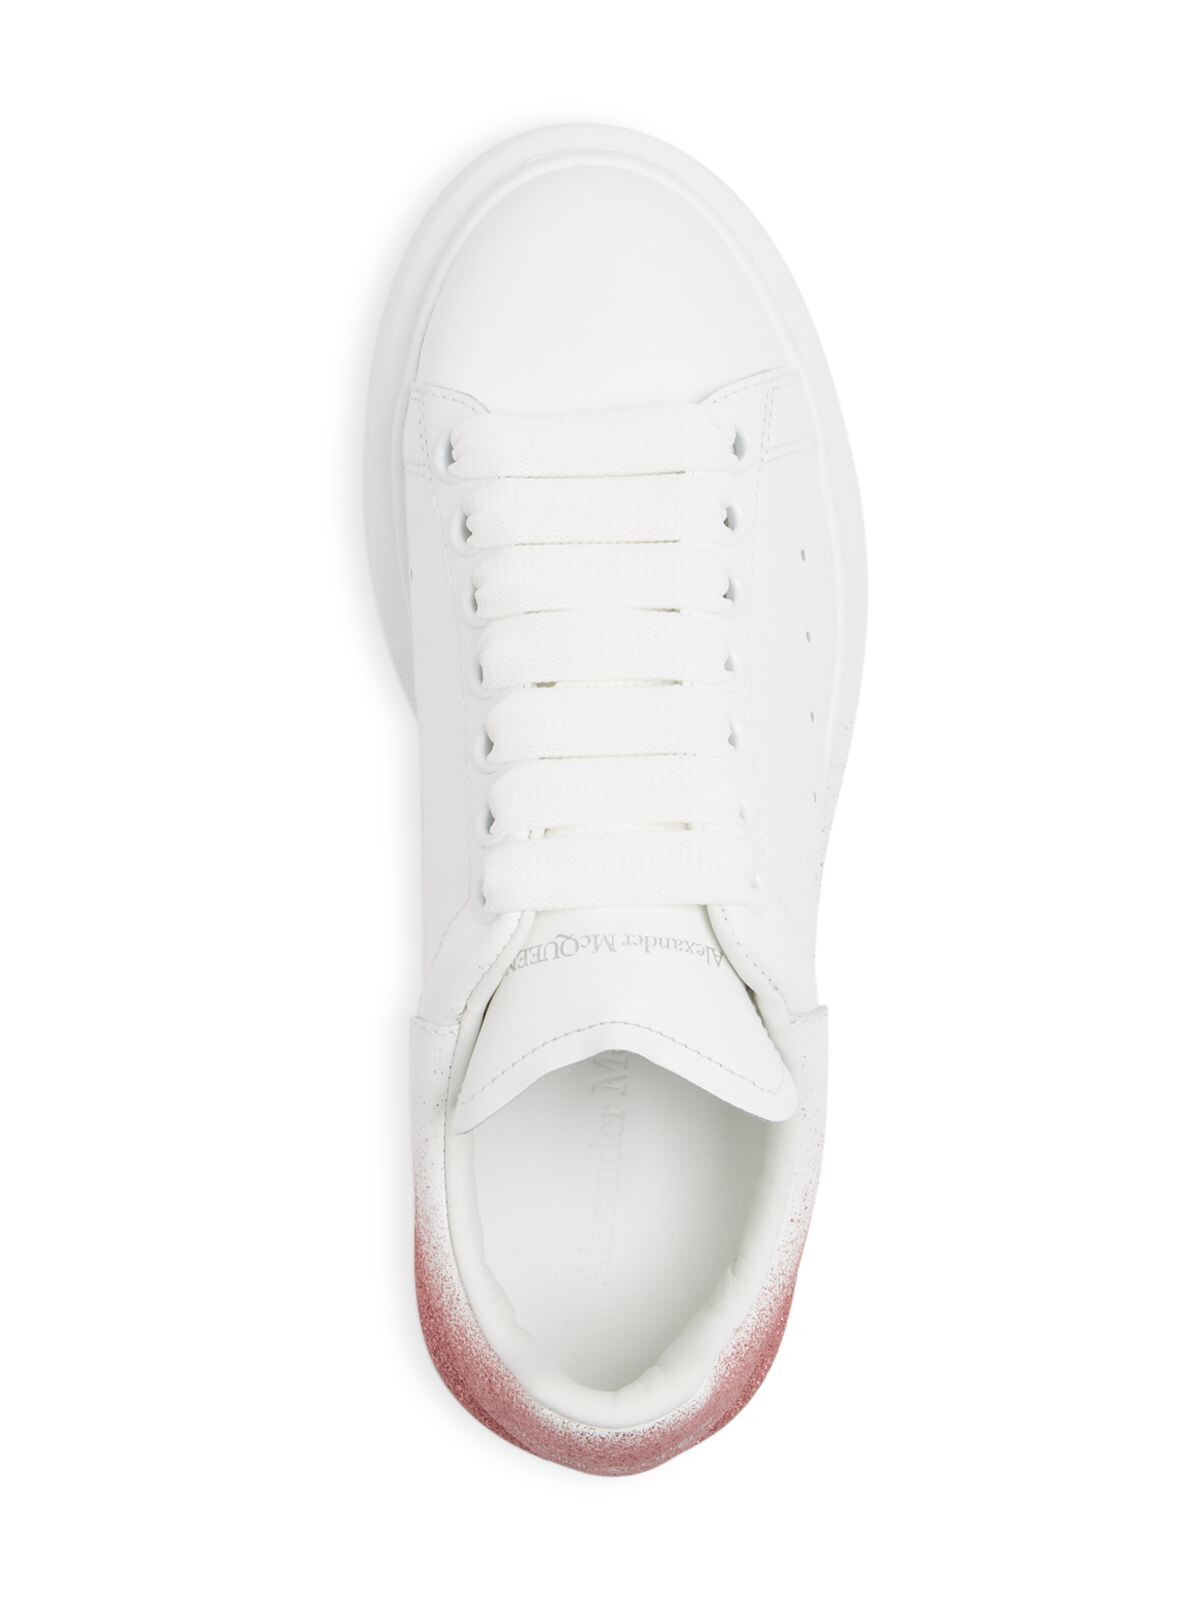 ALEXANDER MCQUEEN Womens White Logo 1-1/2" Platform Glitter Perforated Larry Round Toe Wedge Lace-Up Leather Sneakers Shoes 37.5